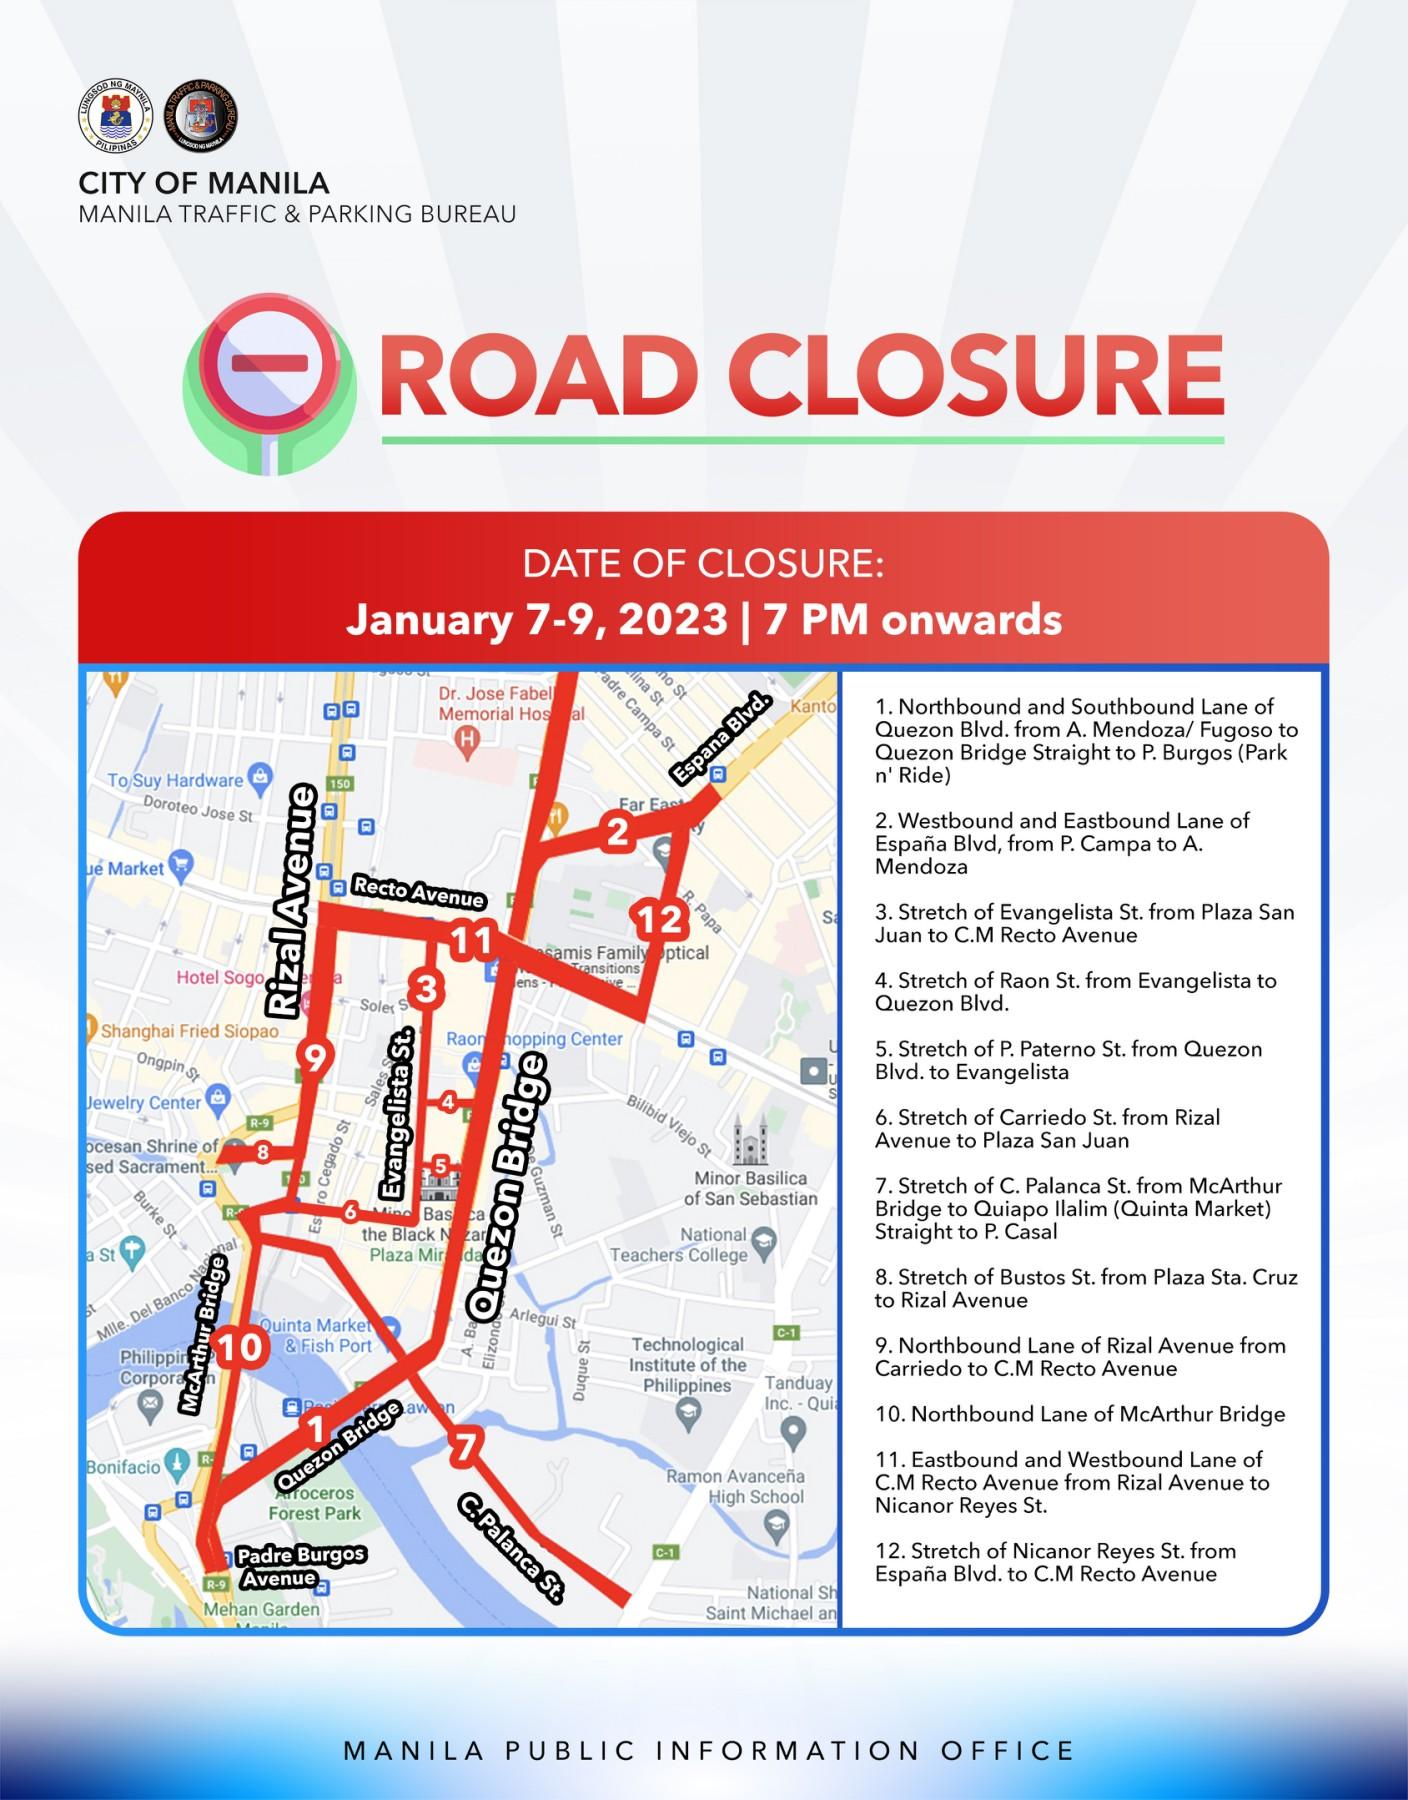 Schedule of road closures in Manila for Feast of the Black Nazarene